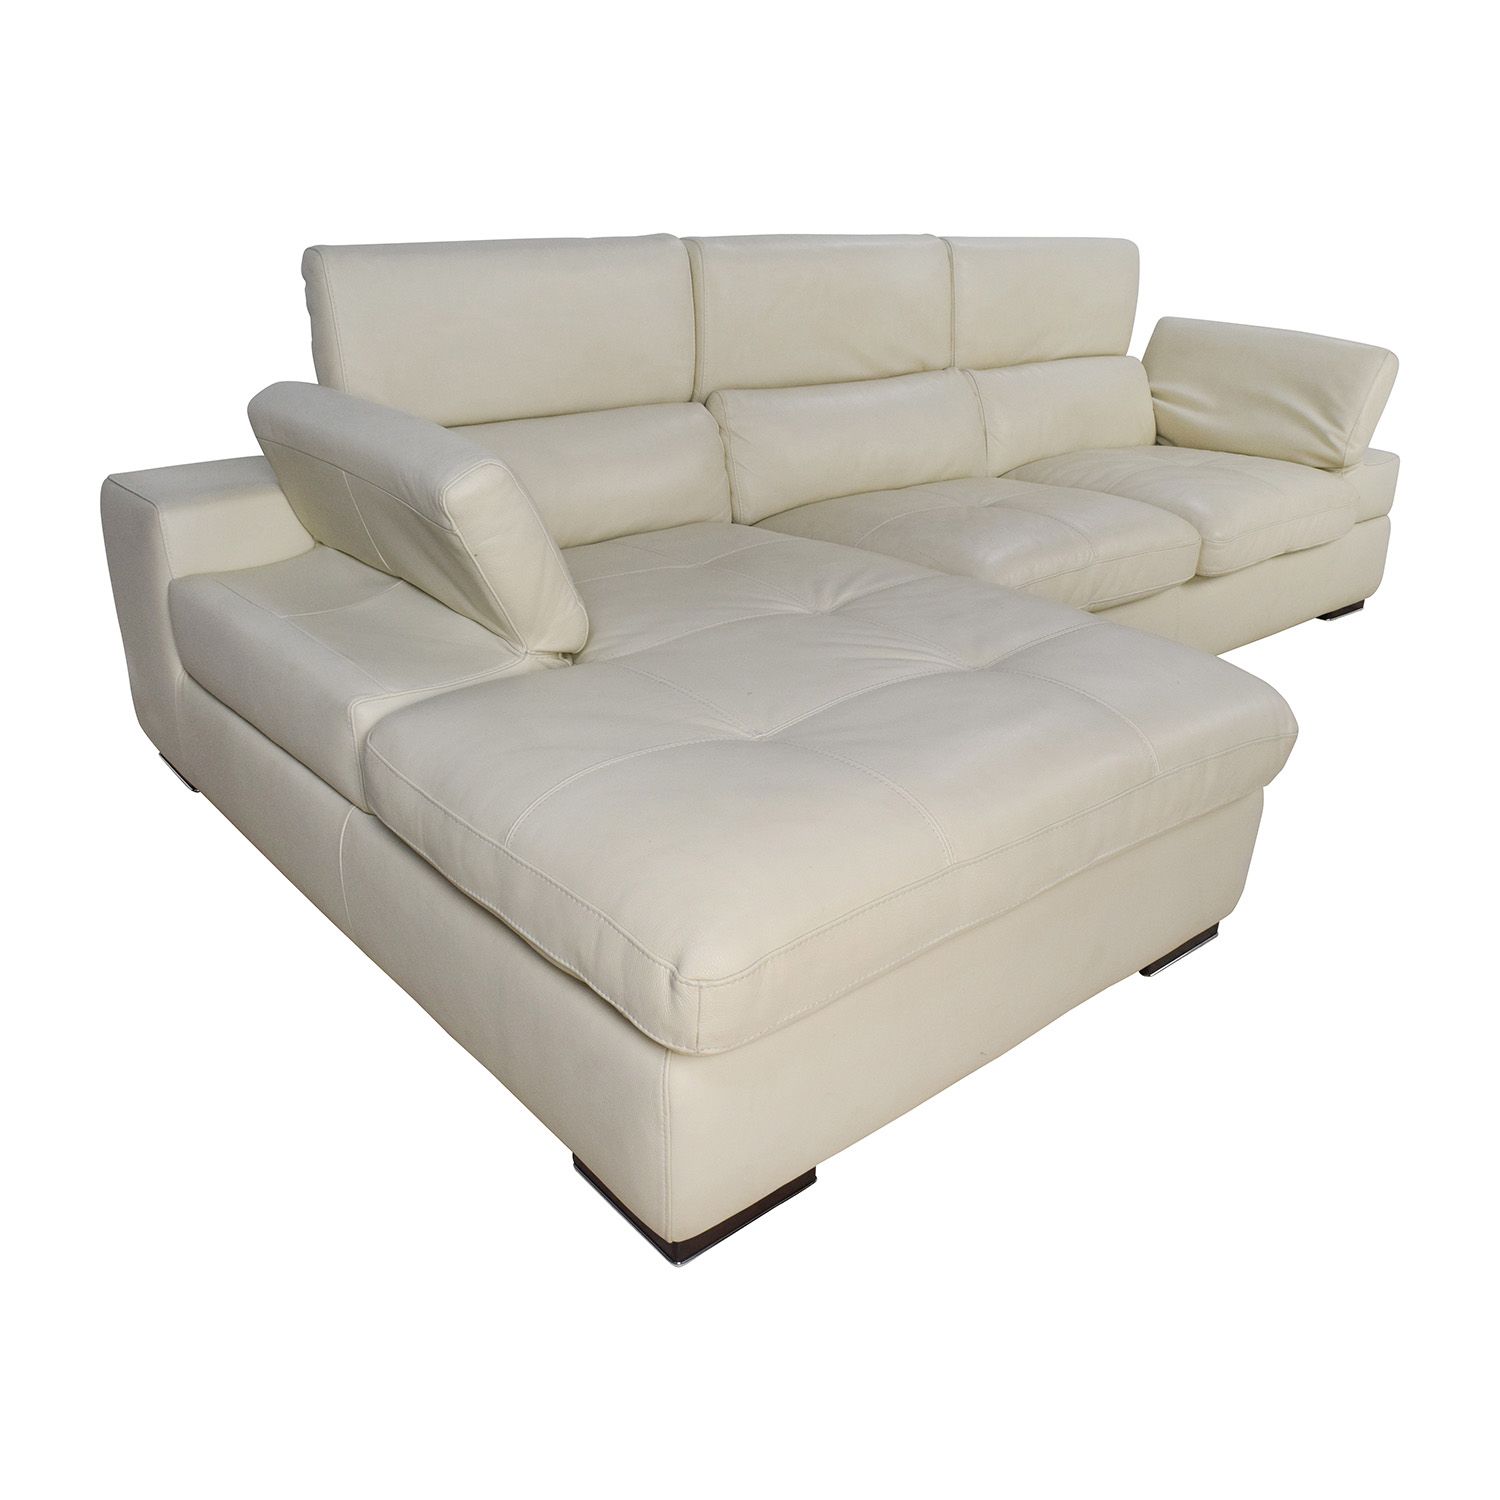 69% Off – L Shaped Cream Leather Sectional Sofa / Sofas Within Owego L Shaped Sectional Sofas (View 14 of 15)